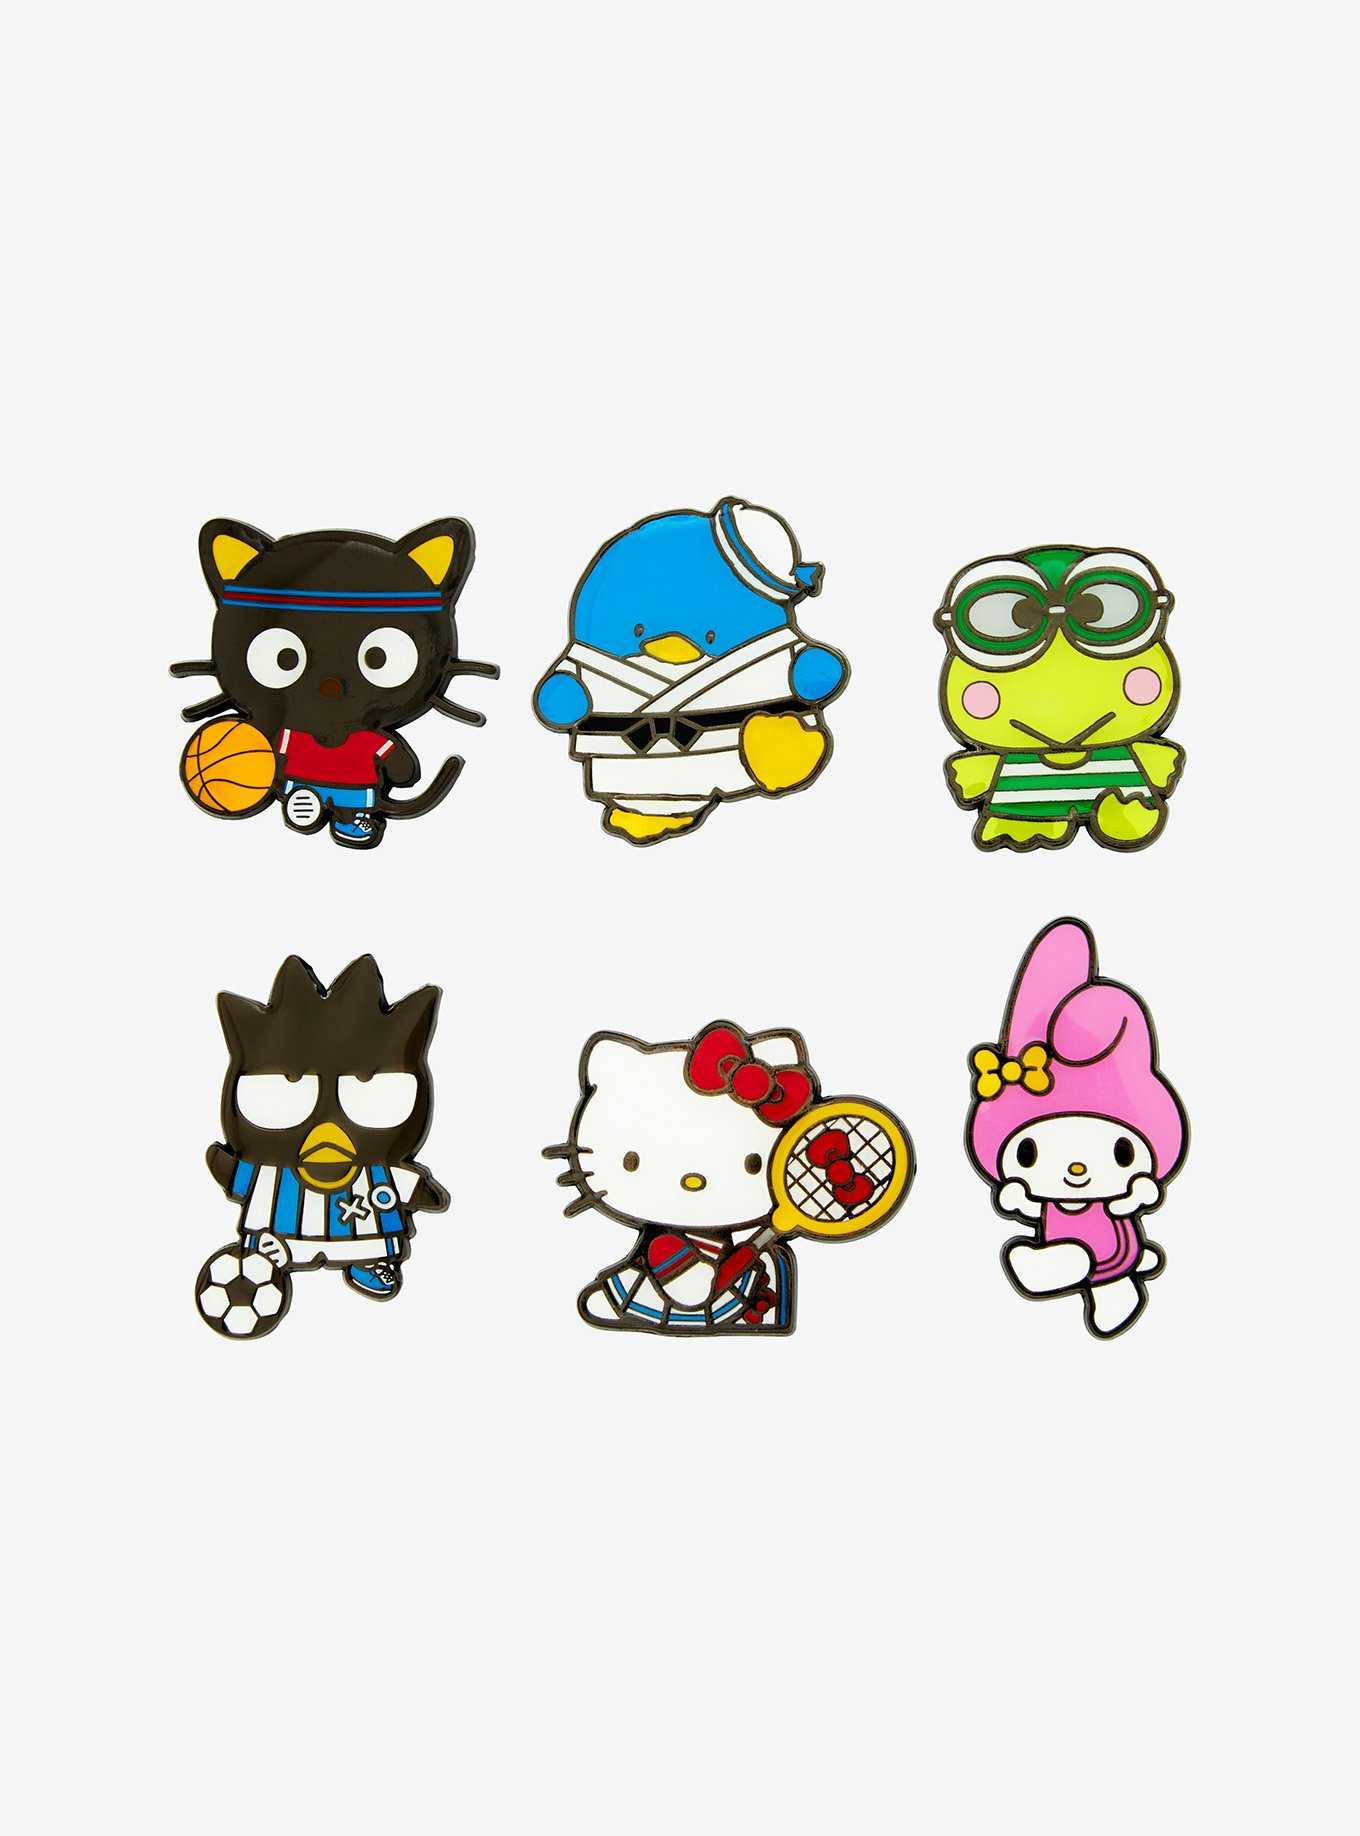 Loungefly Sanrio Hello Kitty and Friends Carnival Blind Box Pin